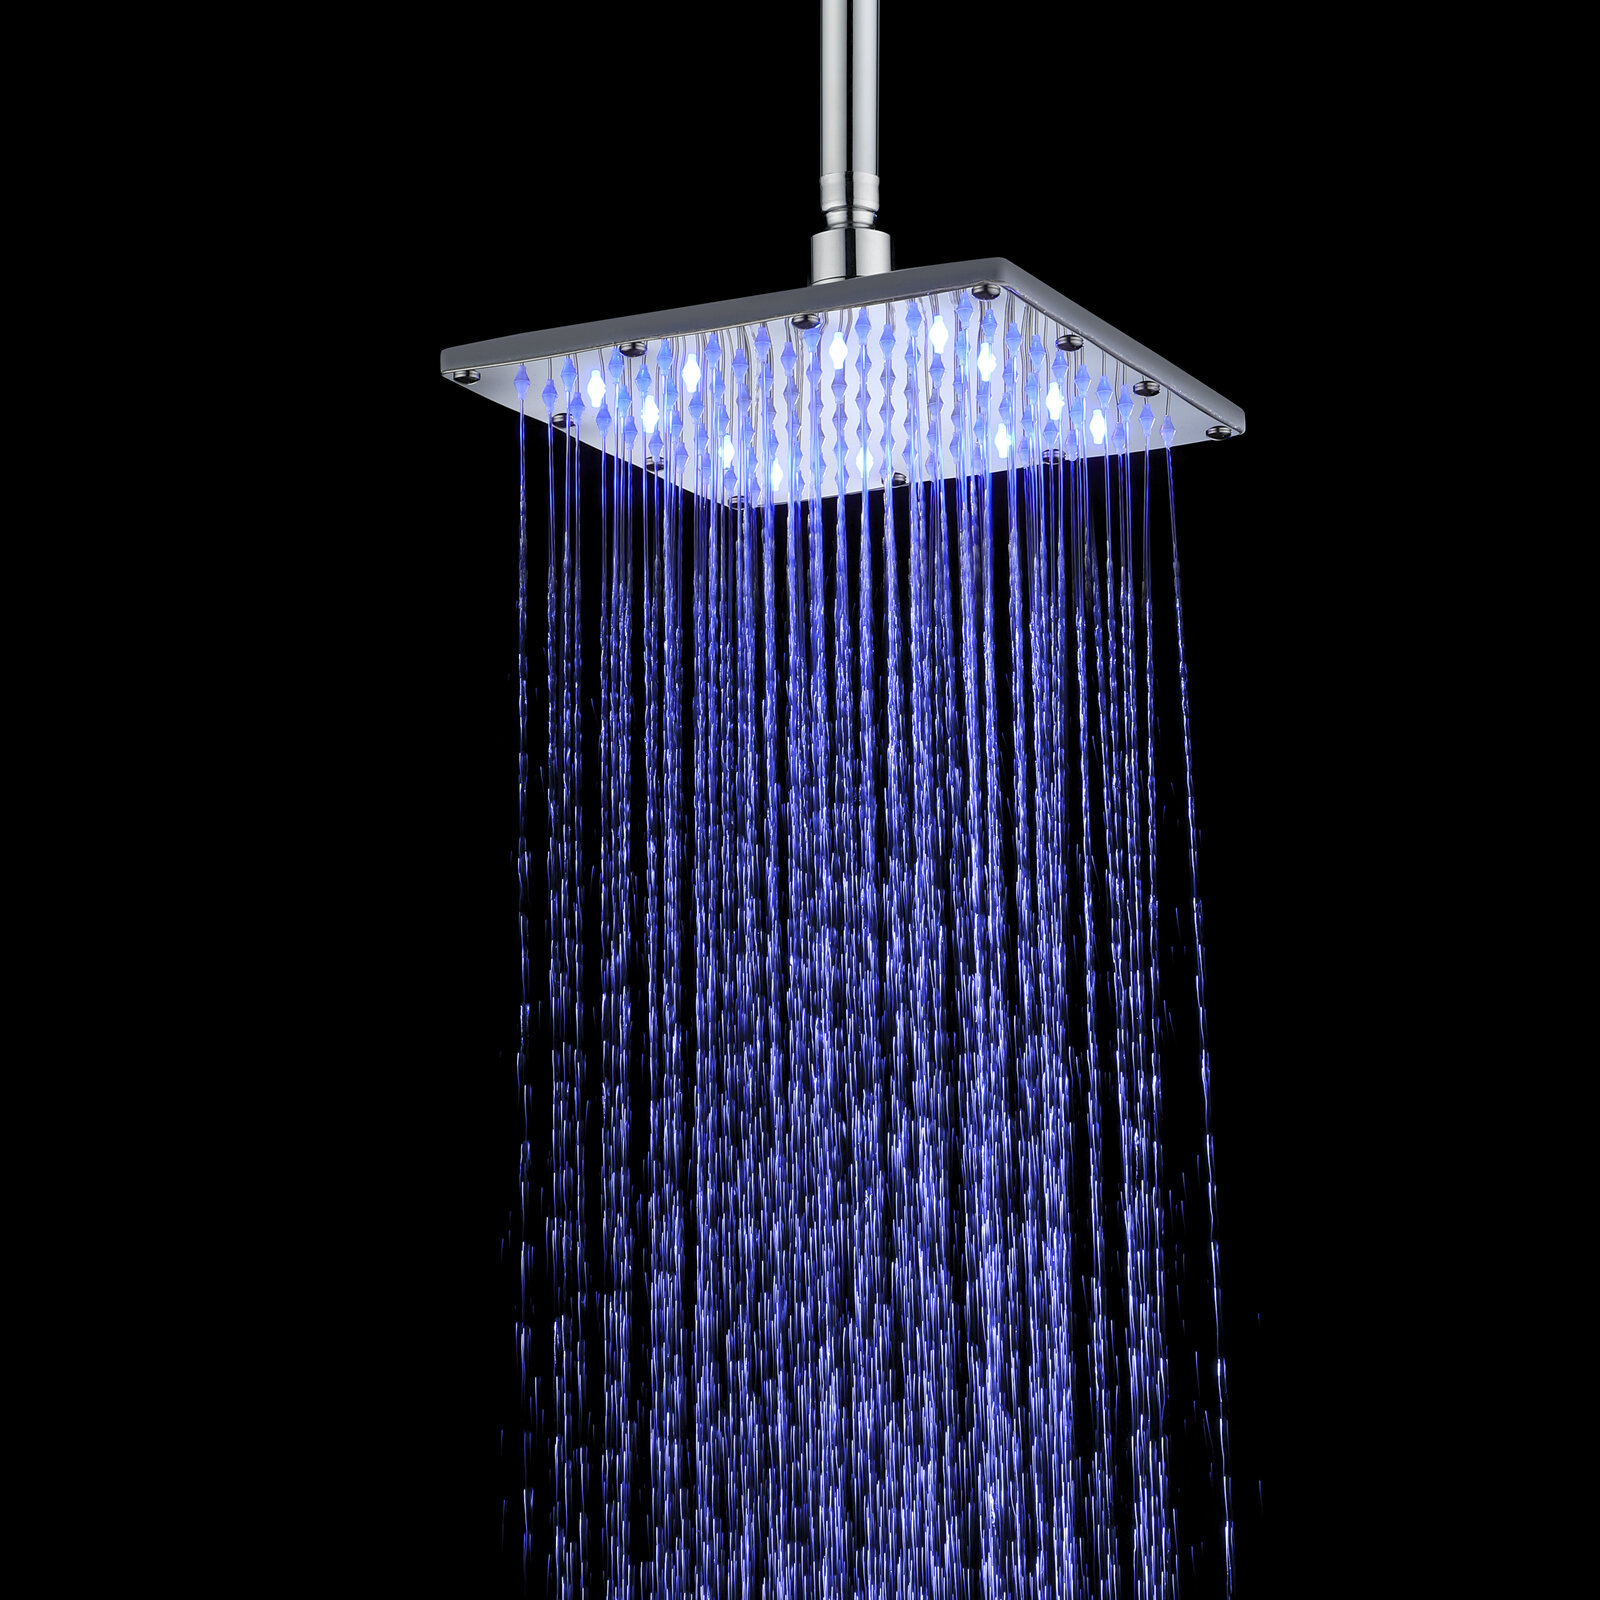 Supersonic Heuer Rain Fixed Shower Head with Temperature-Based LED ...